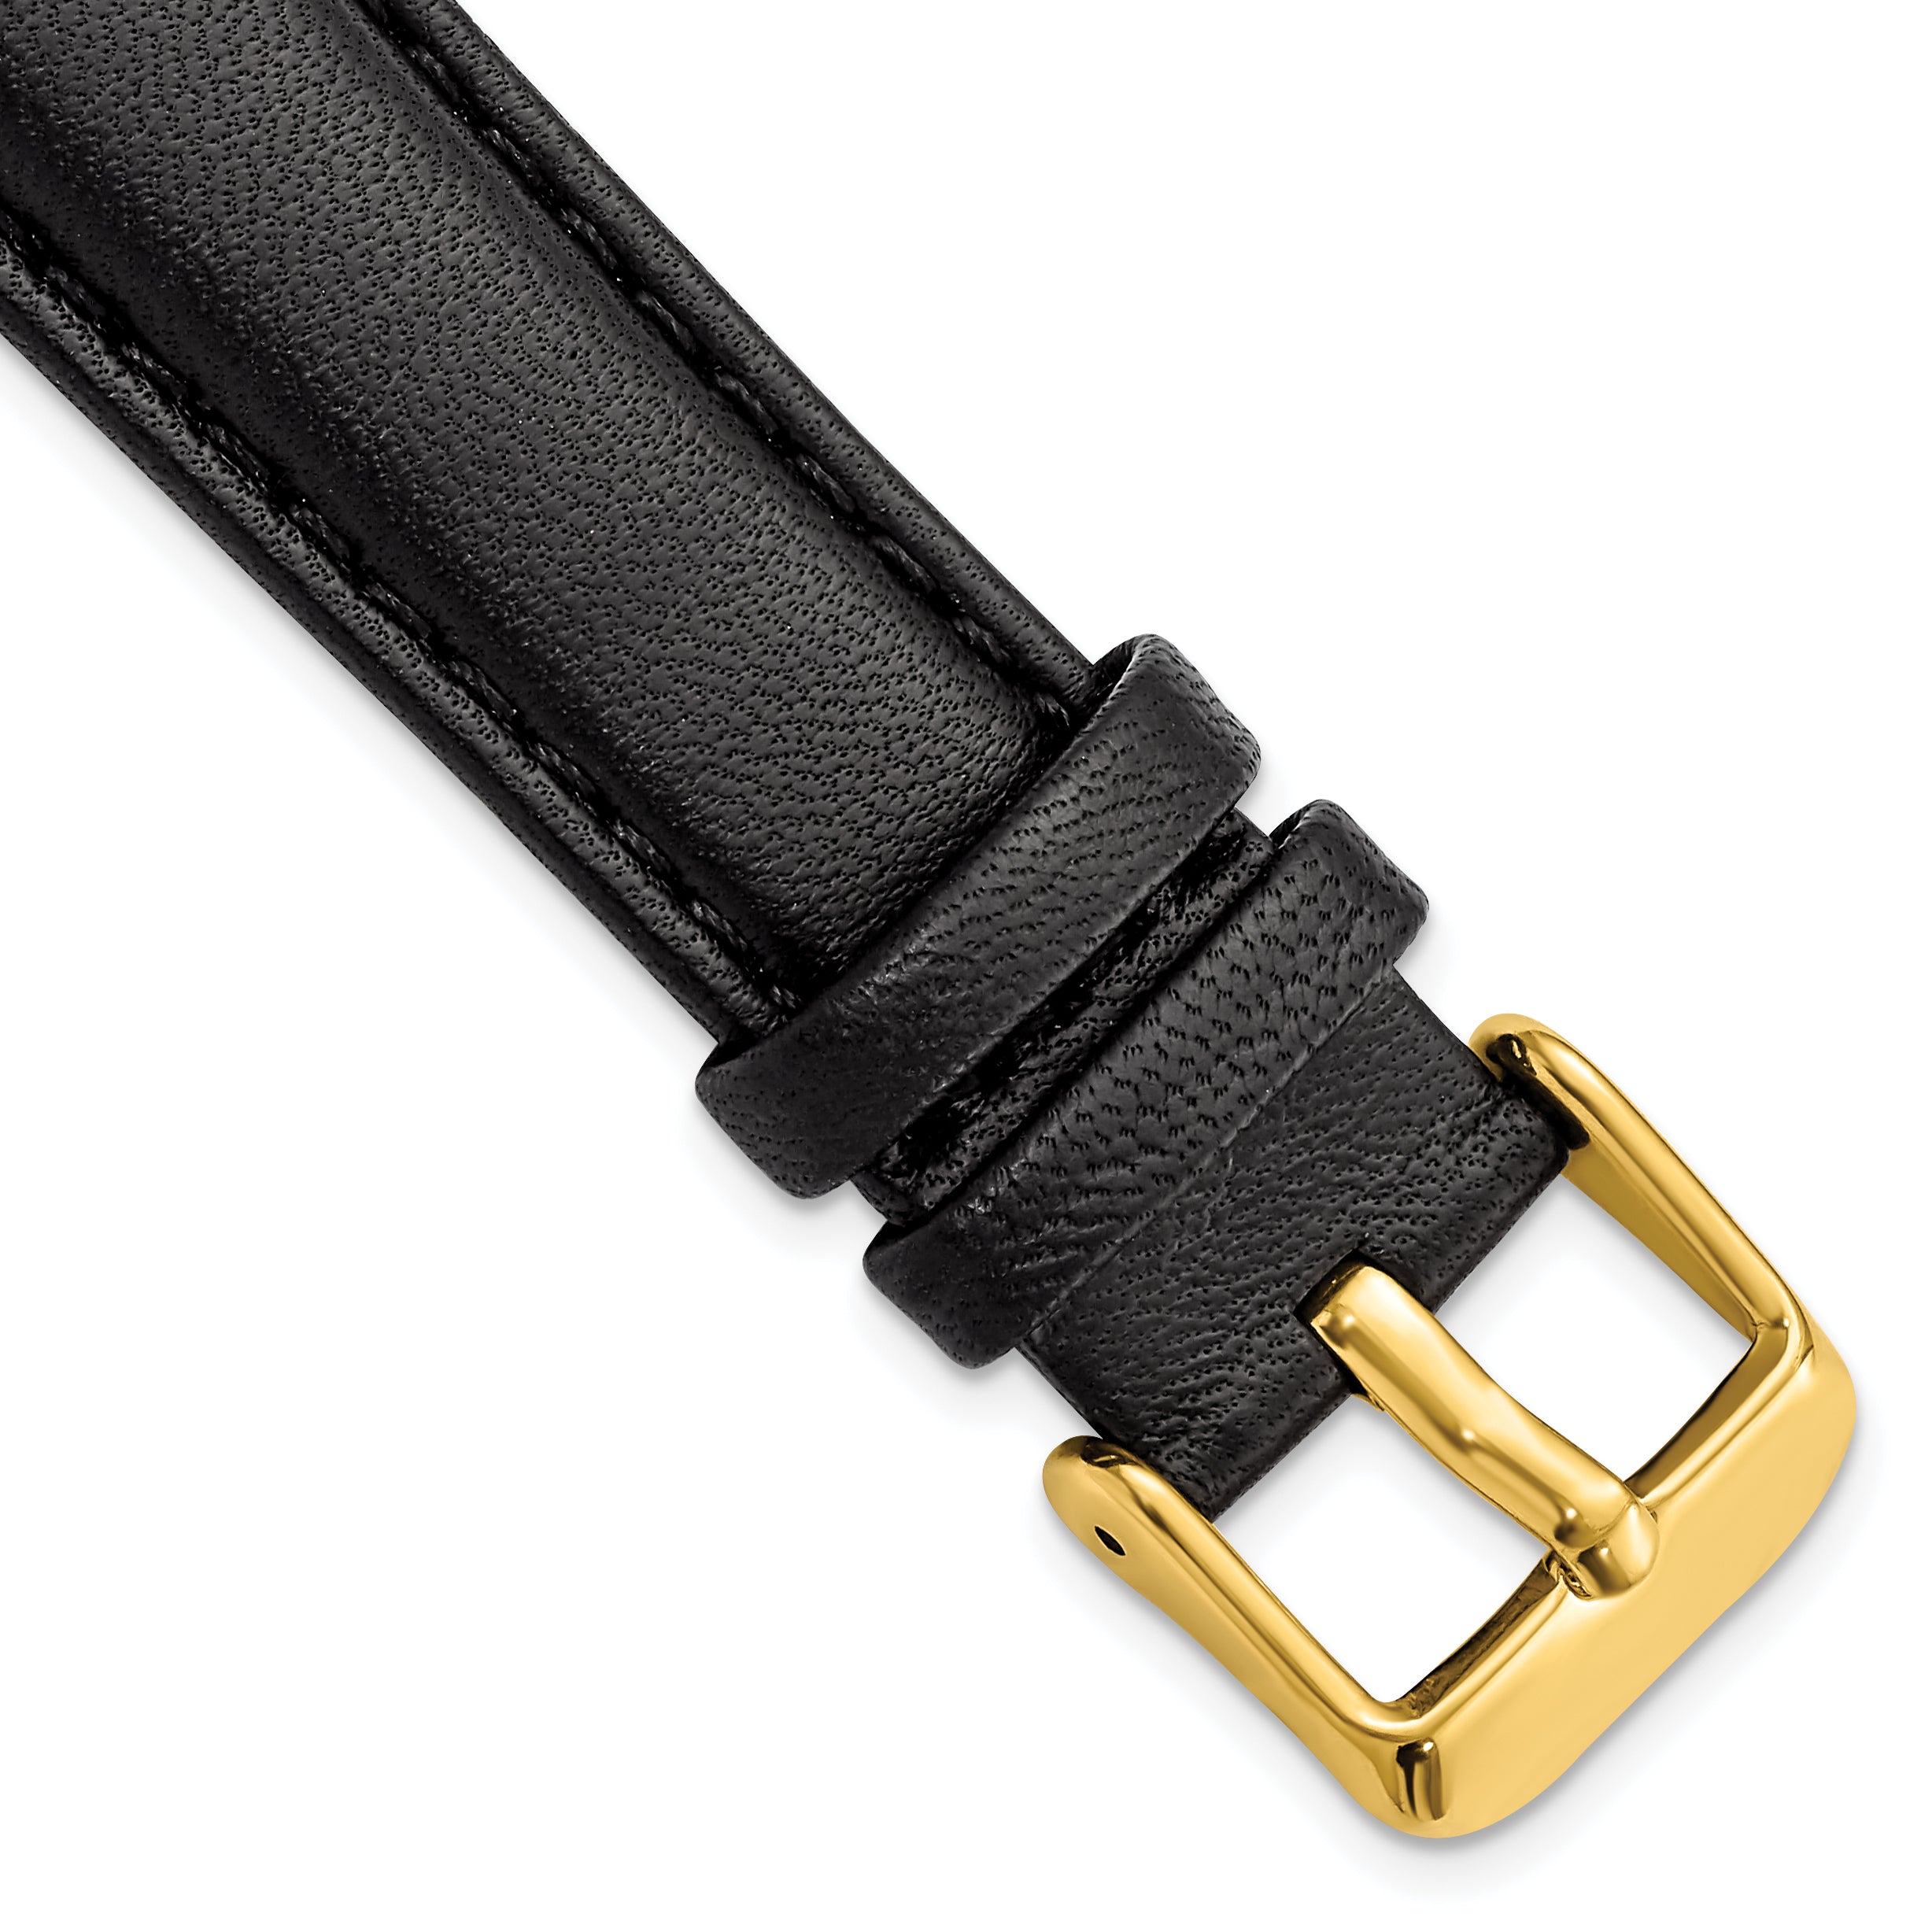 DeBeer 18mm Black Glove Leather with Gold-tone Panerai Style Buckle 7.75 inch Watch Band